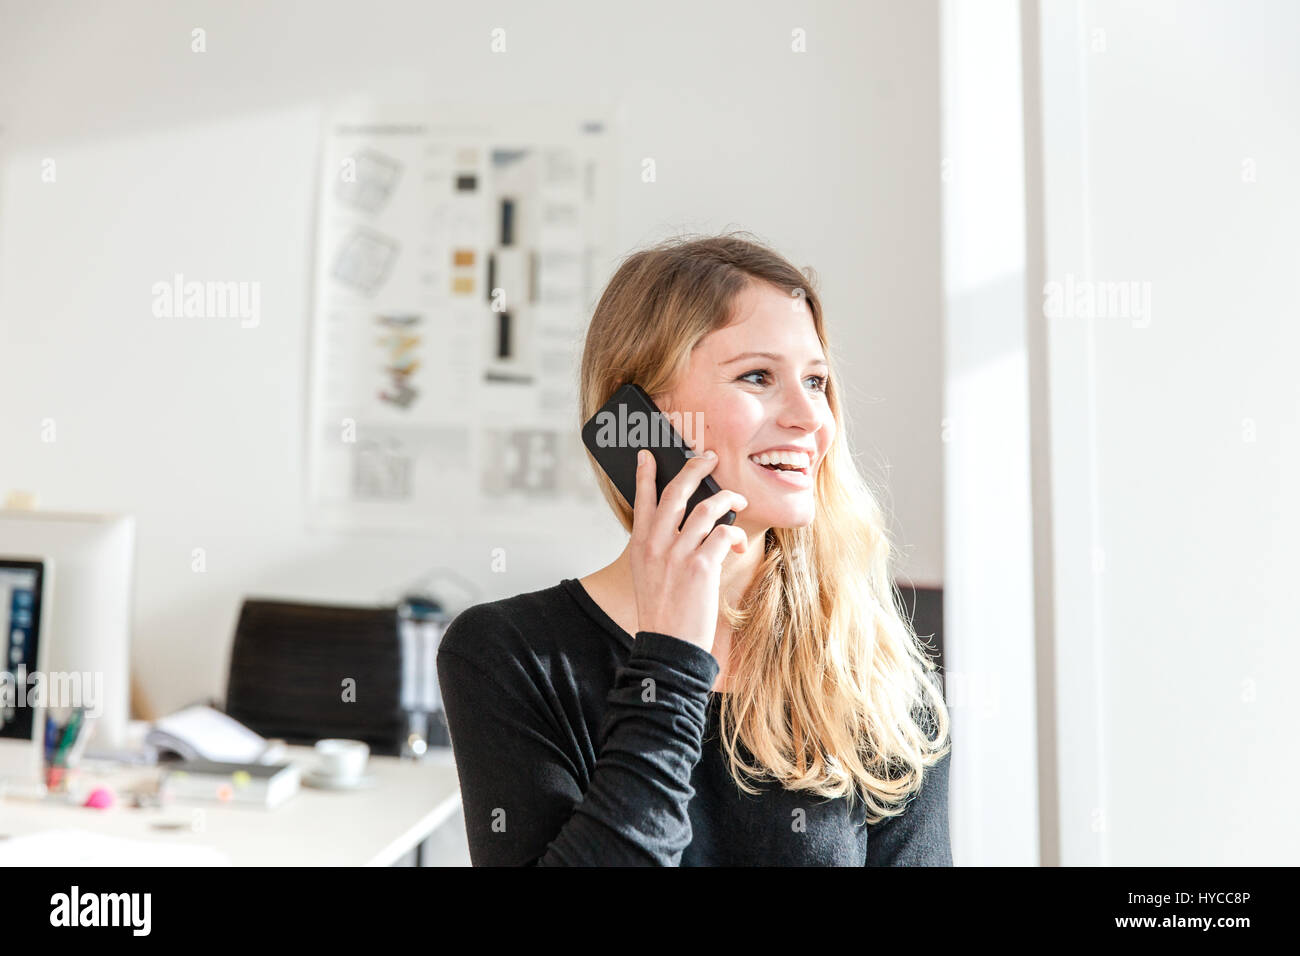 Young woman in office using smartphone to make telephone call looking away smiling Stock Photo